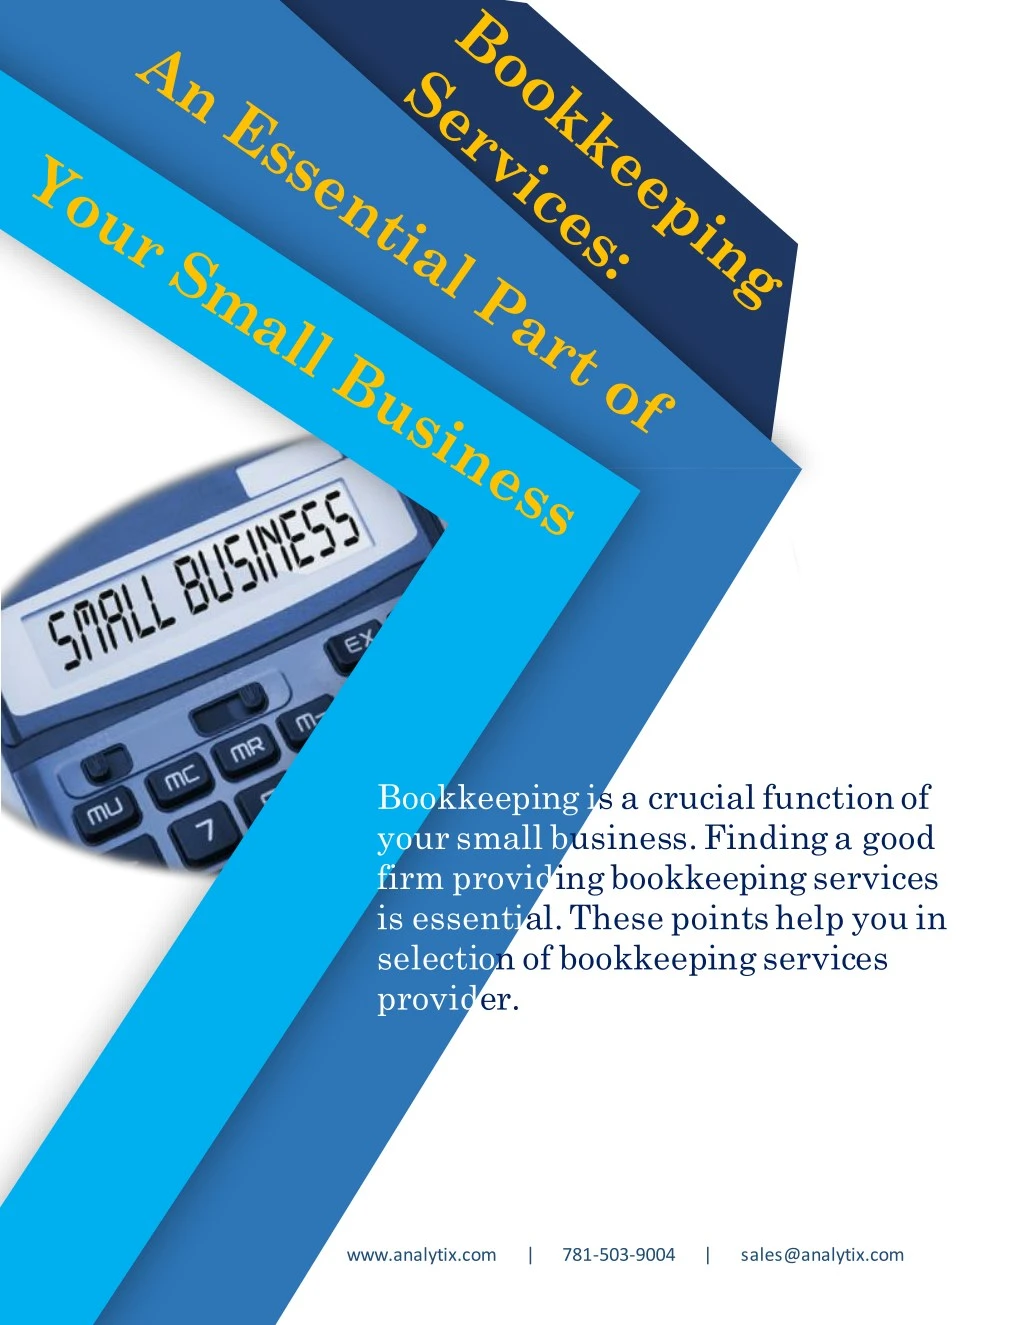 bookkeeping is a crucial function of your small